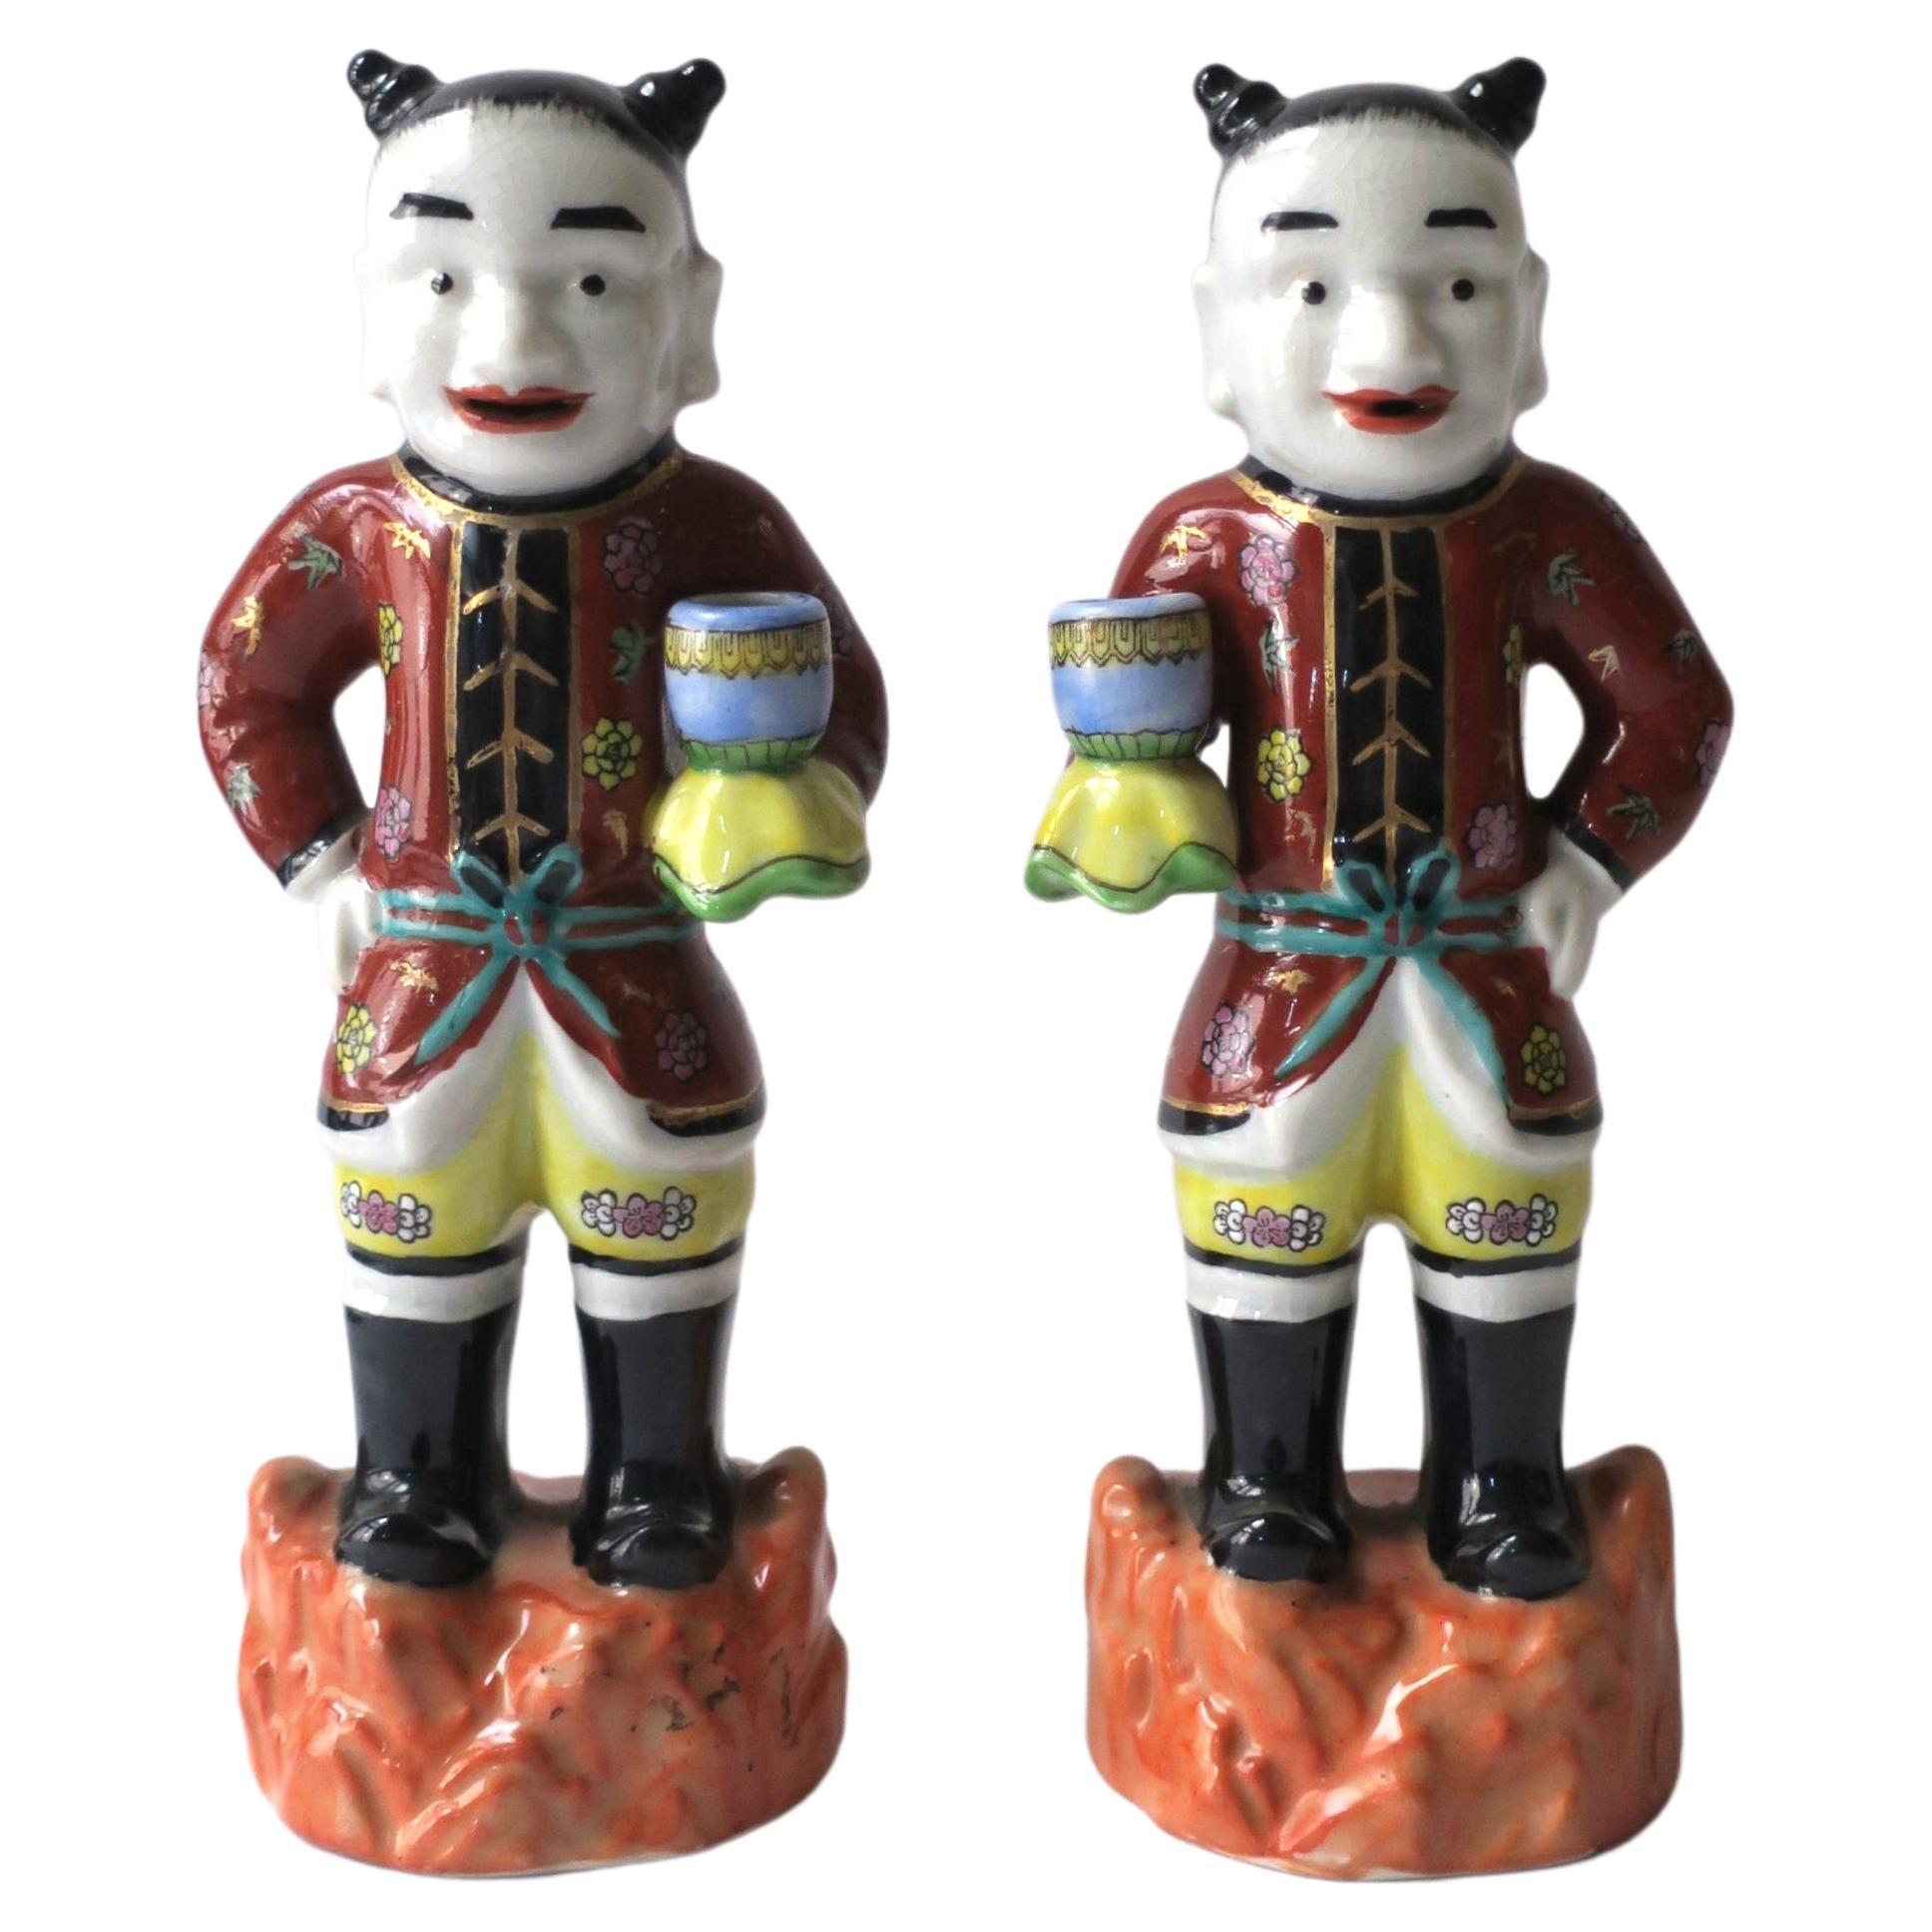 Chinoiserie Style Ceramic Male Figures Hand Painted Decorative Objects, Pair For Sale